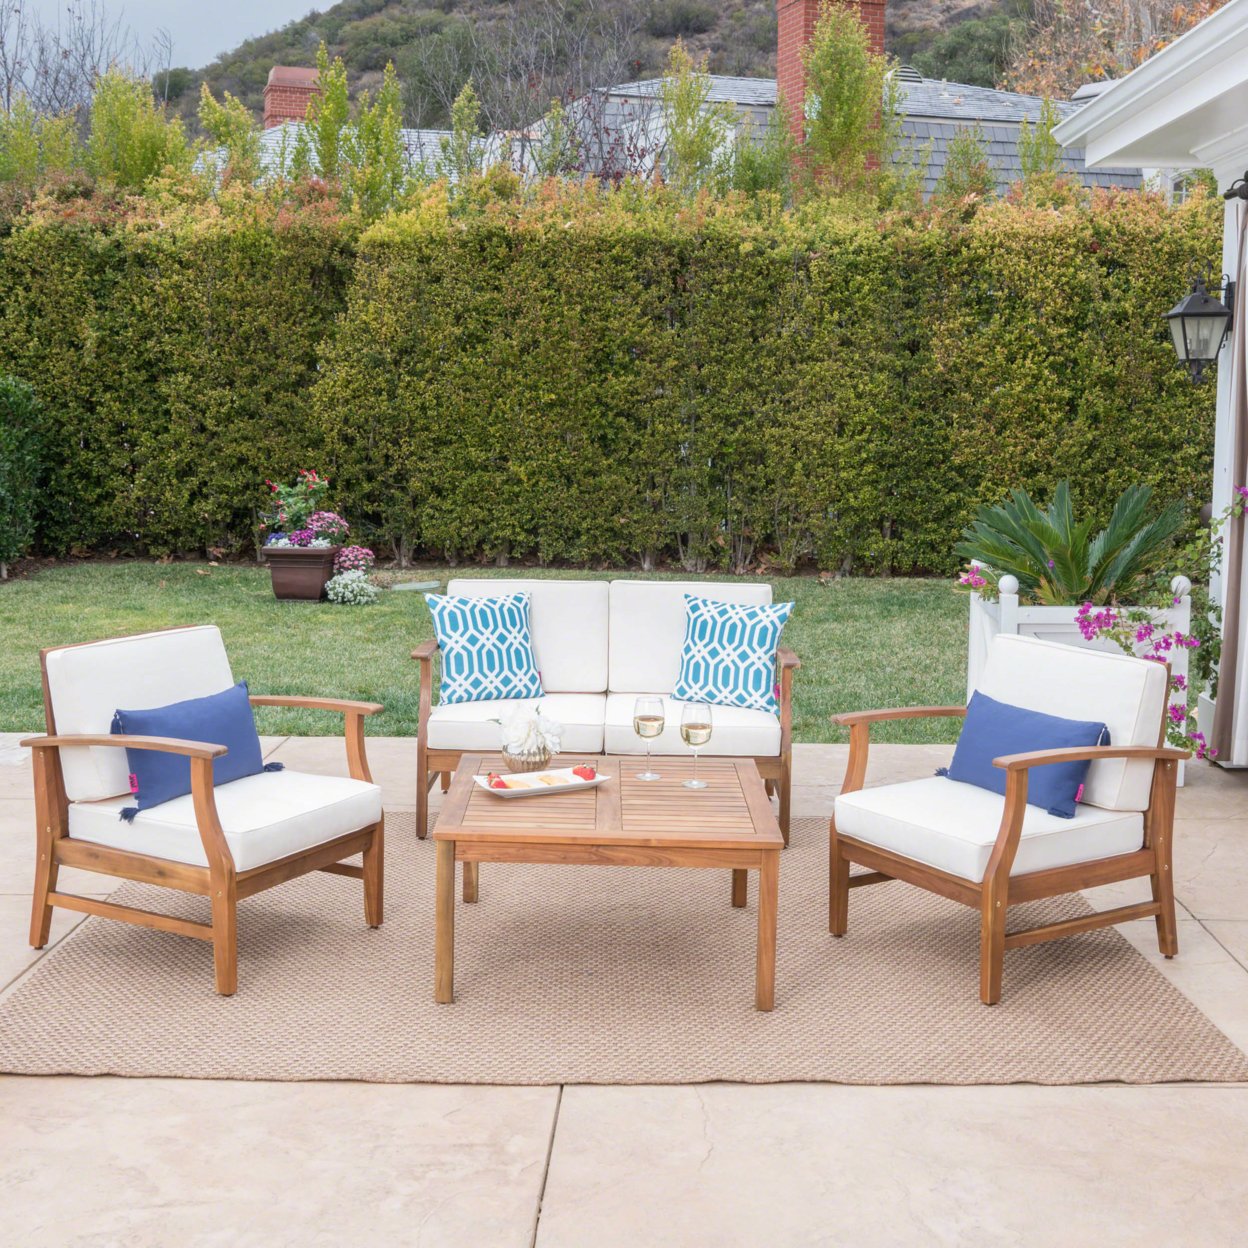 Lorelei Outdoor 4 Seat Teak Finished Acacia Wood Chat Set With Water Resistant Cushions - Cream